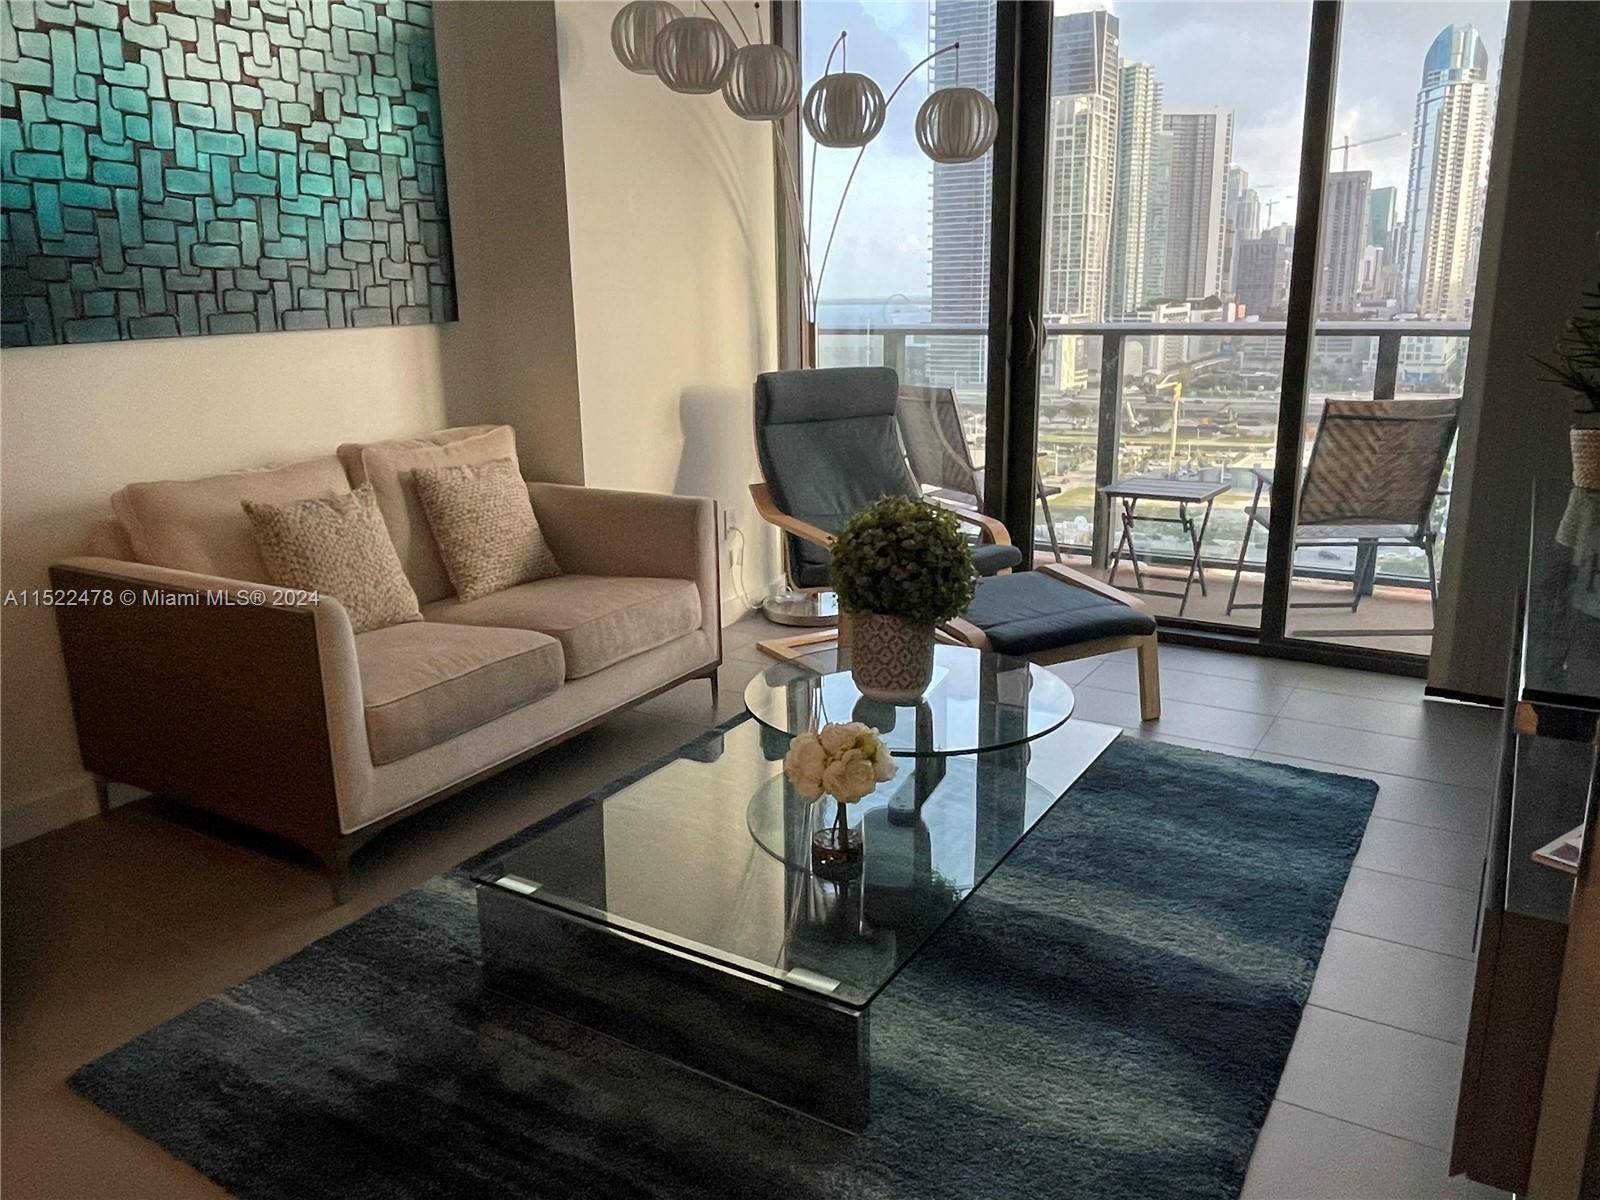 Canvas Condo Miami. This is an elegant and modern building with a minimalistic touch.